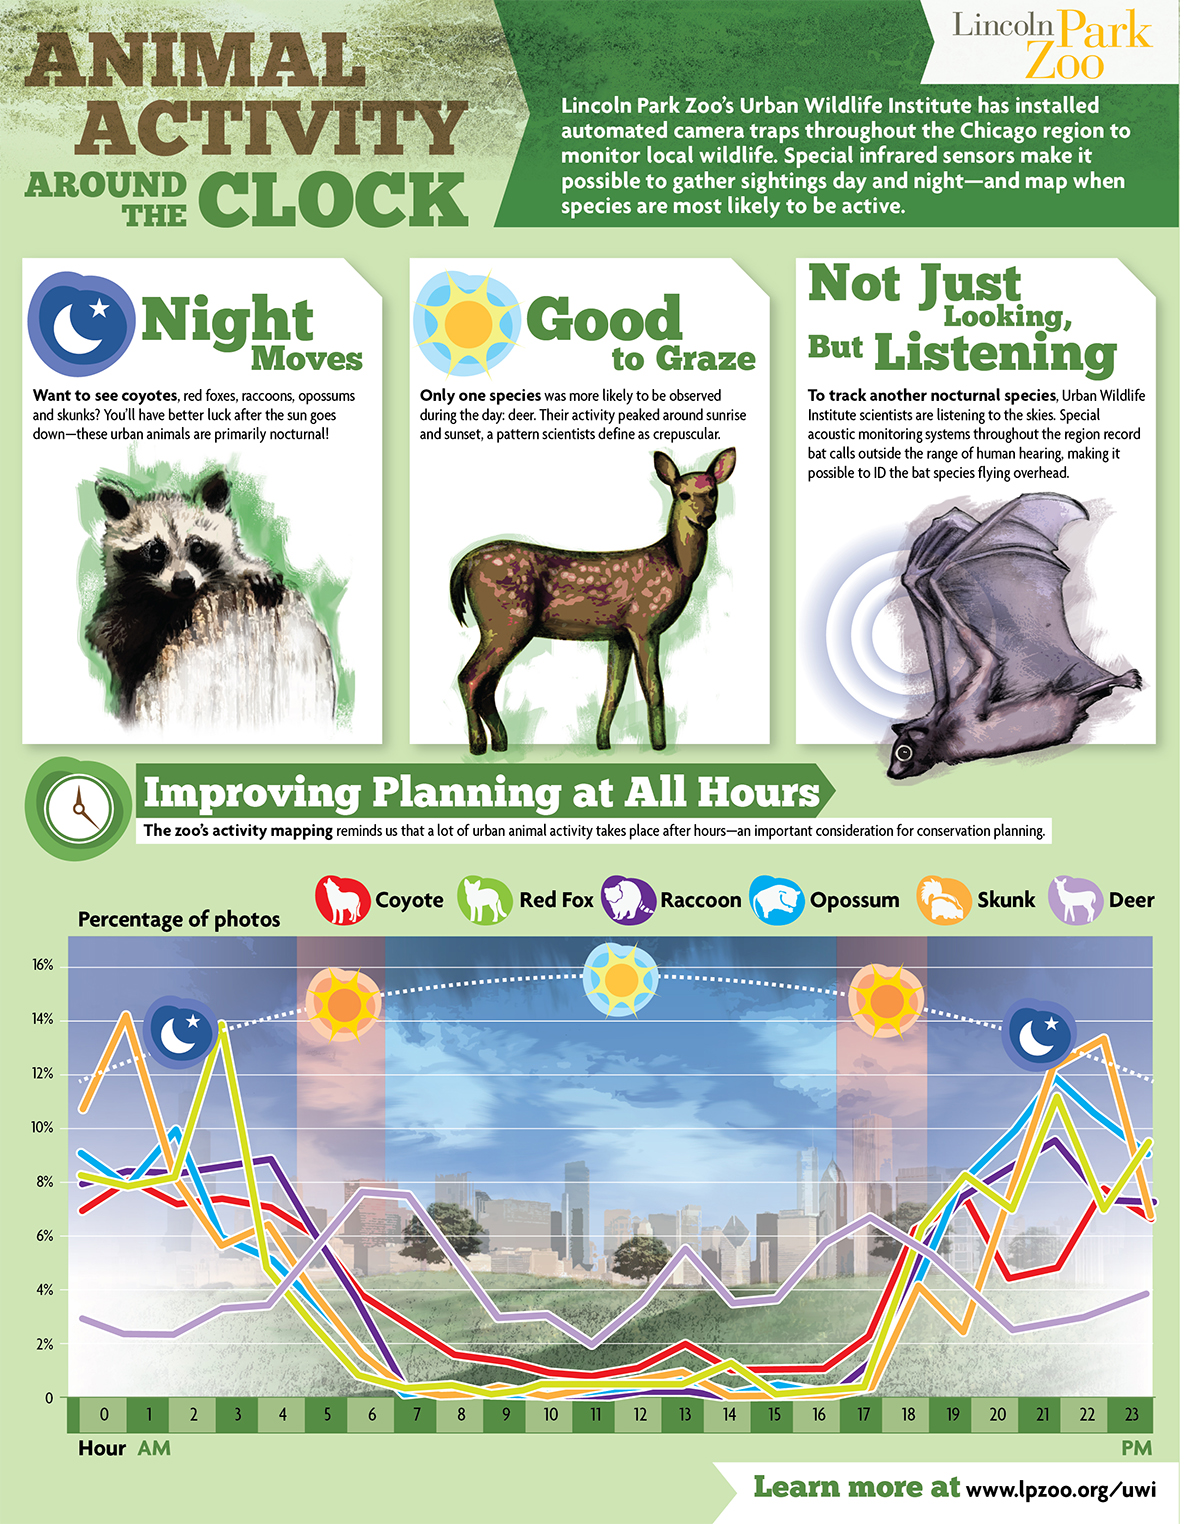 Infographic: Animal Sleep Patterns & Nocturnal Activity | RECOIL OFFGRID